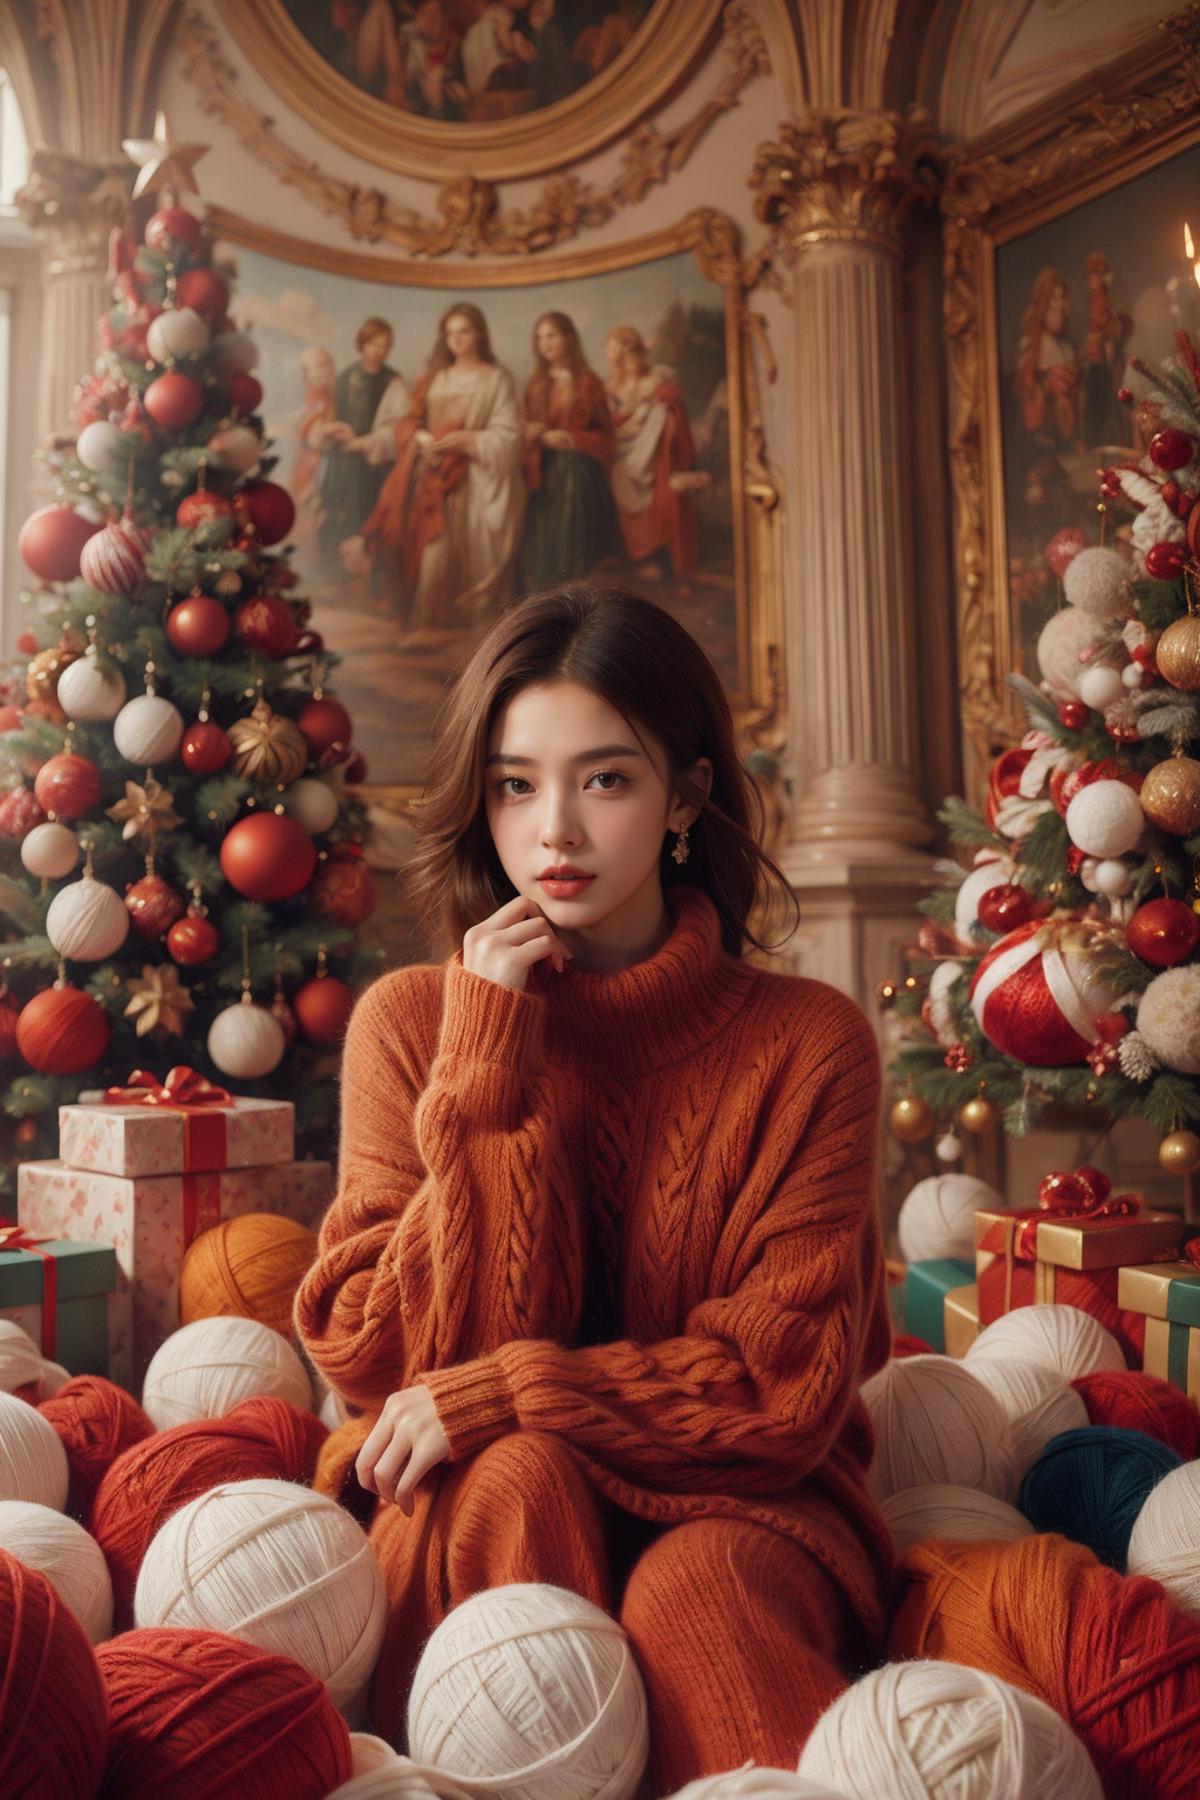 A Woman in an Orange Sweater Posing in Front of a Christmas Tree.